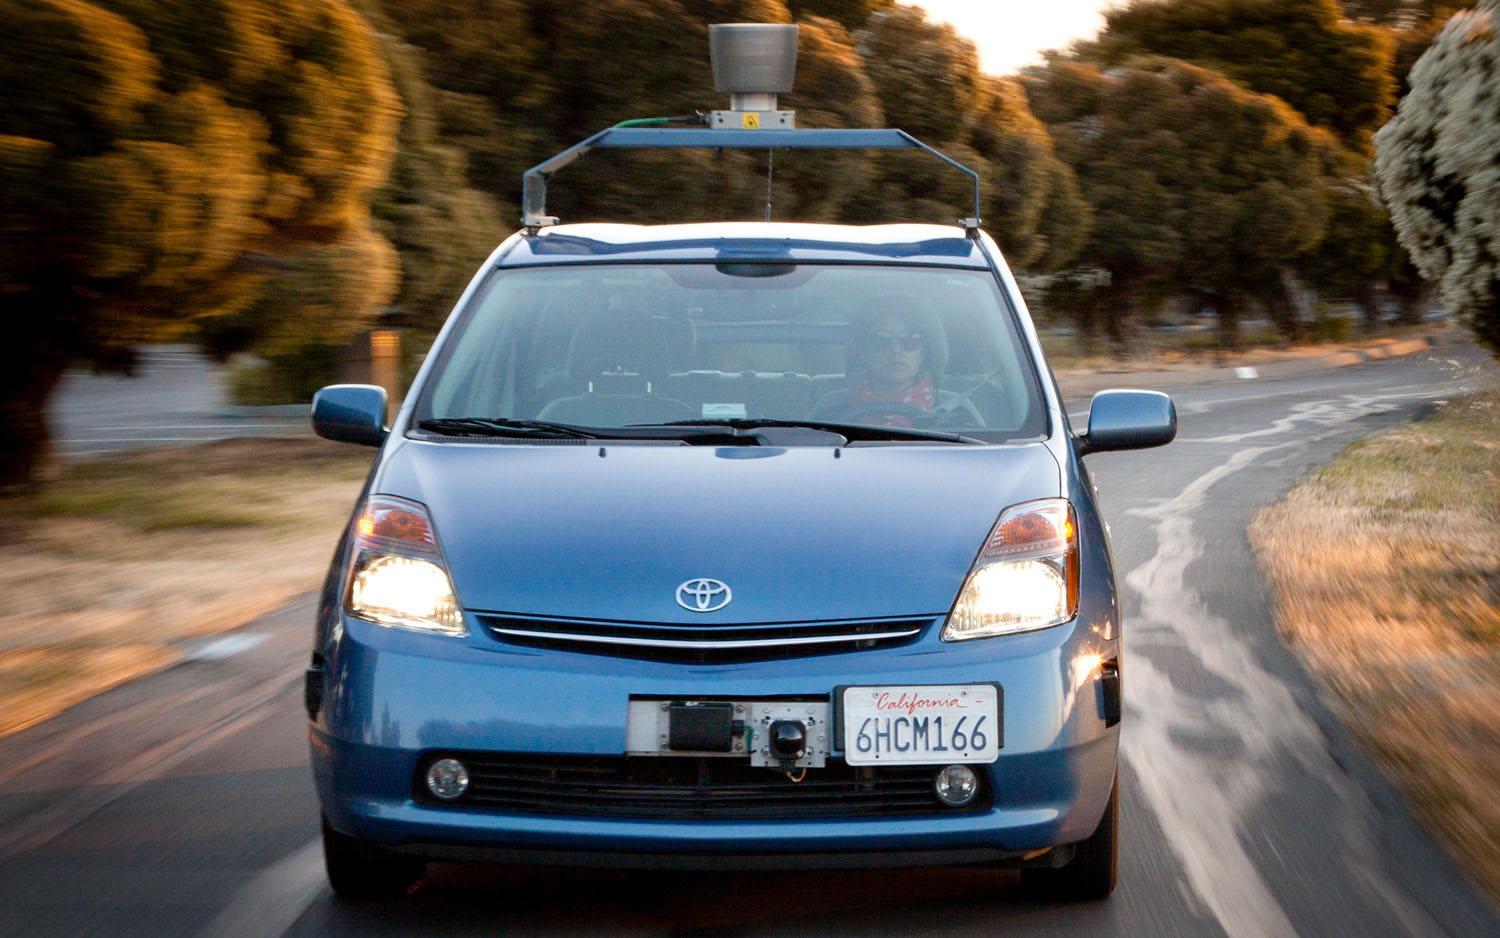 Toyota to launch autonomous driving system by the middle of the decade